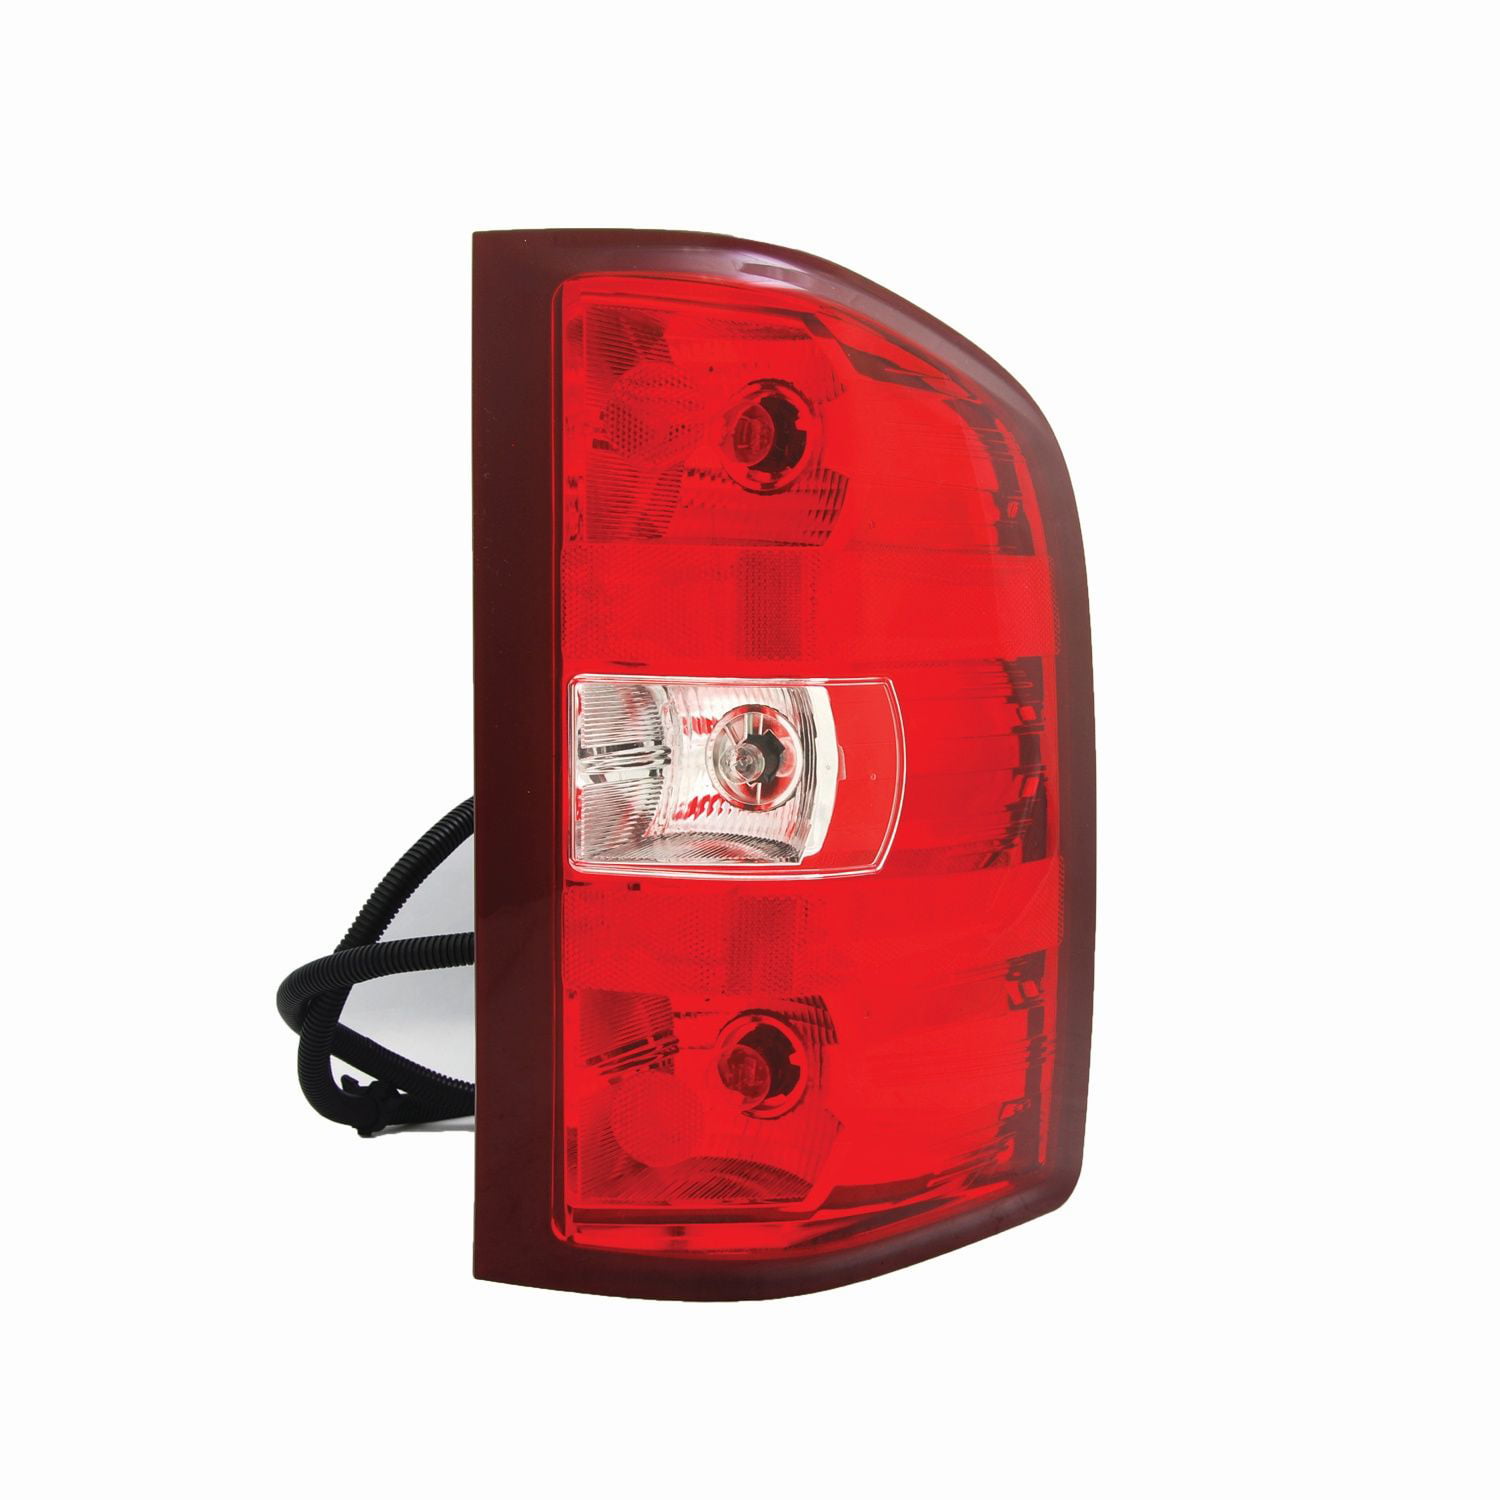 Replacement Tyc 11 6221 90 9 Right Tail Light For Silverado 1500